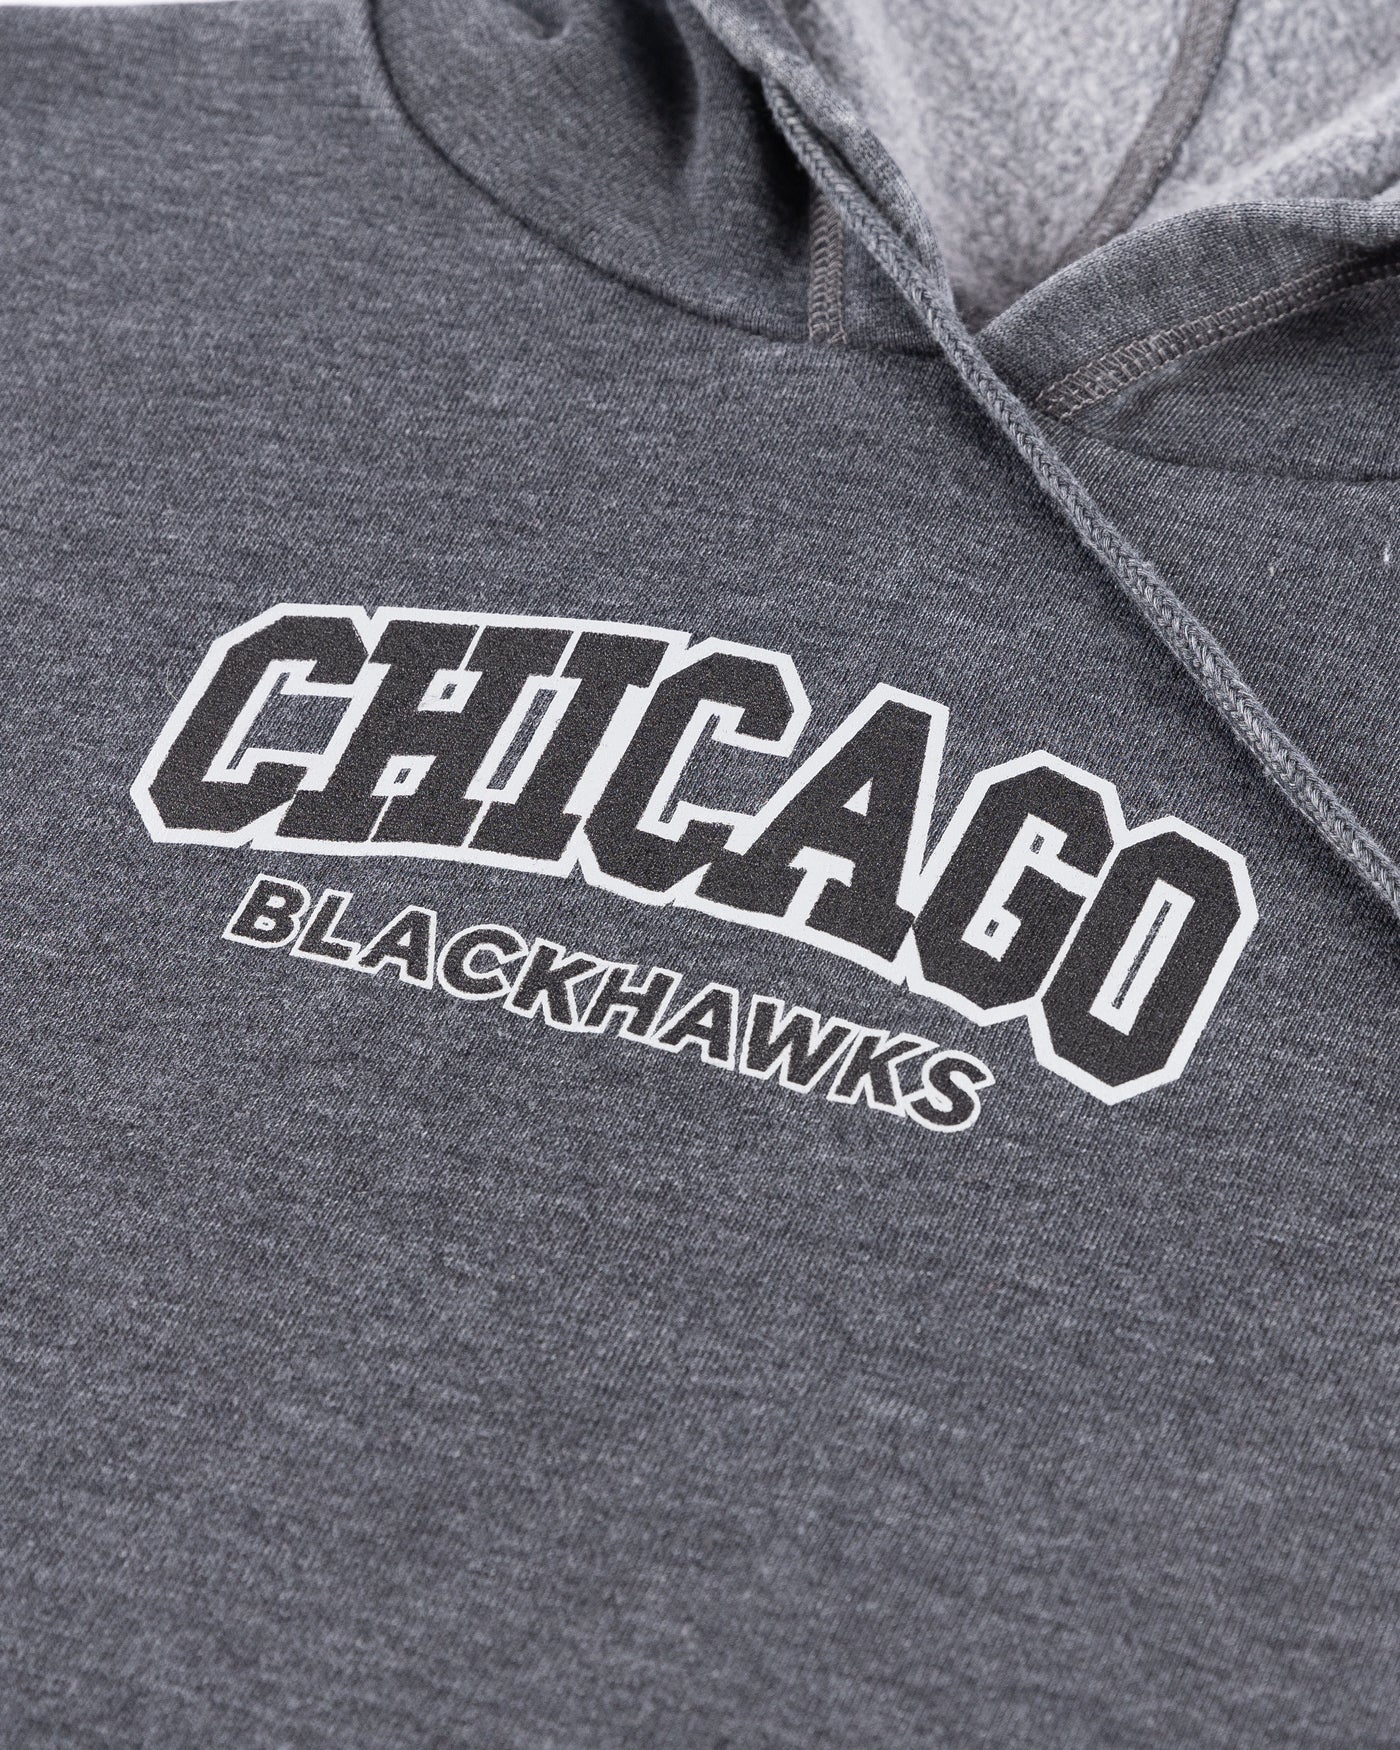 grey chicka-d cropped hoodie with Chicago Blackhawks wordmark across chest - detail lay flat